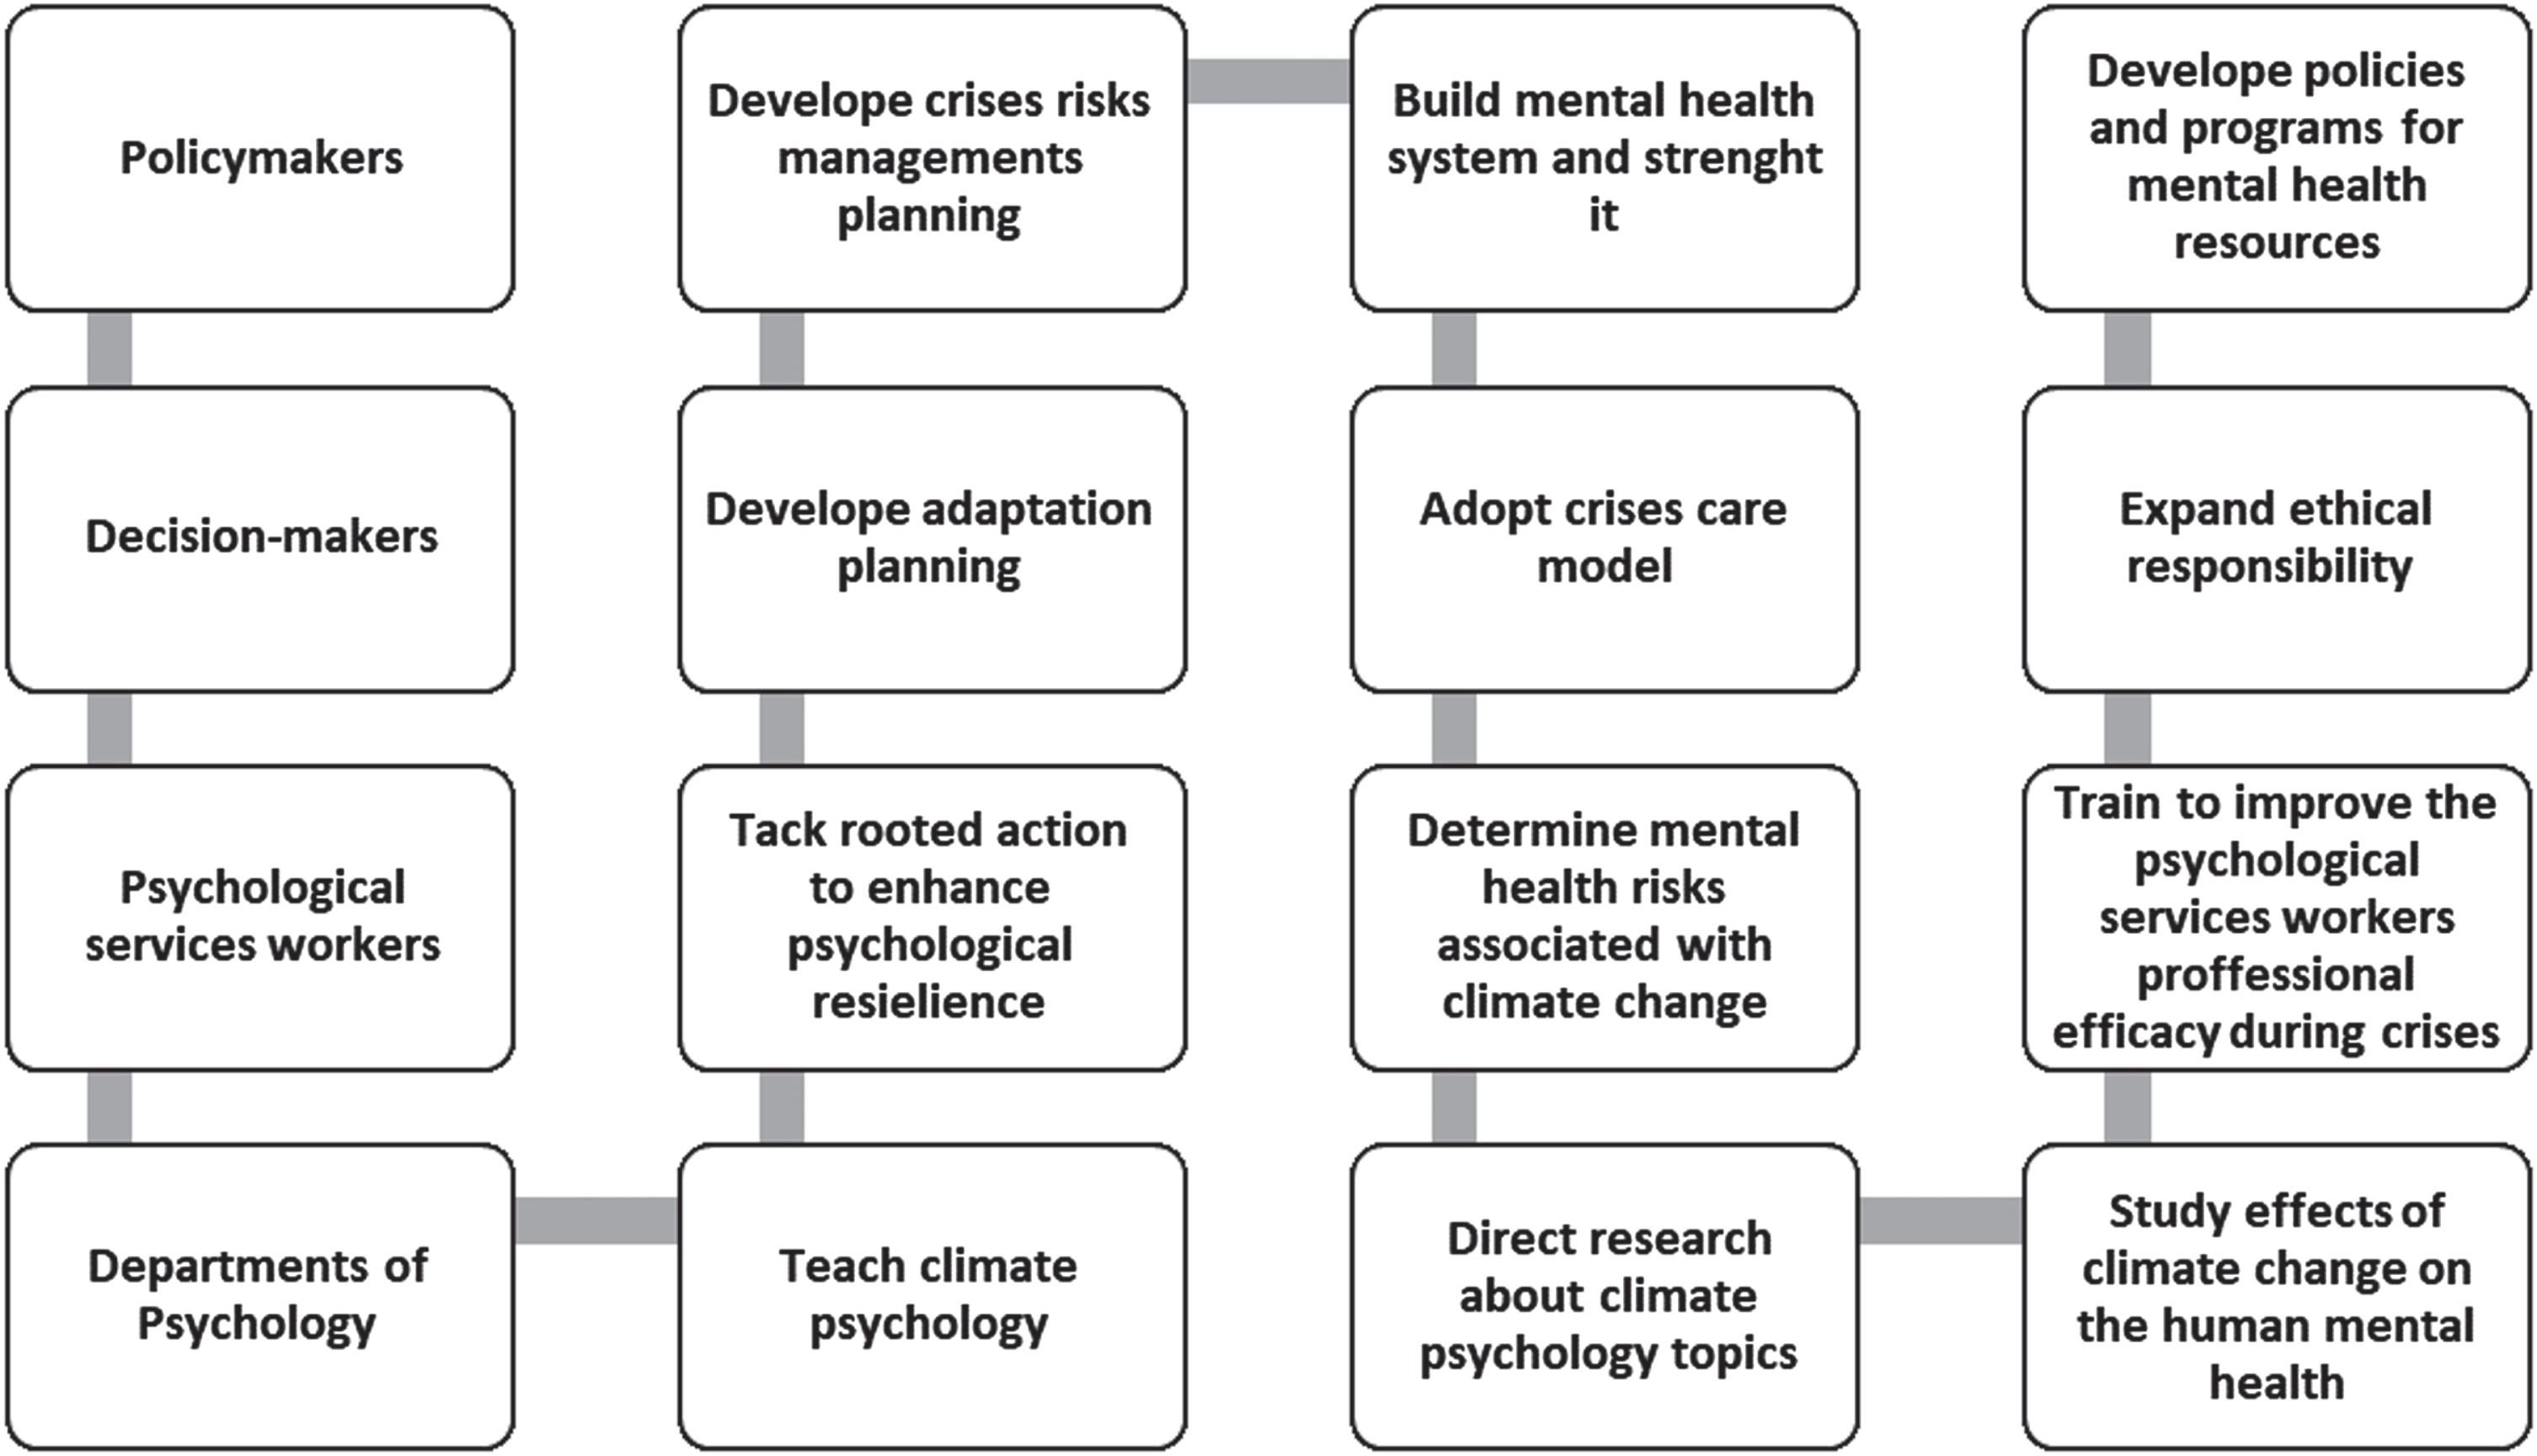 A procedural framework for policymakers, decision-makers, psychological service workers, and psychology departments to manage the risks of climate change impacts on mental health.